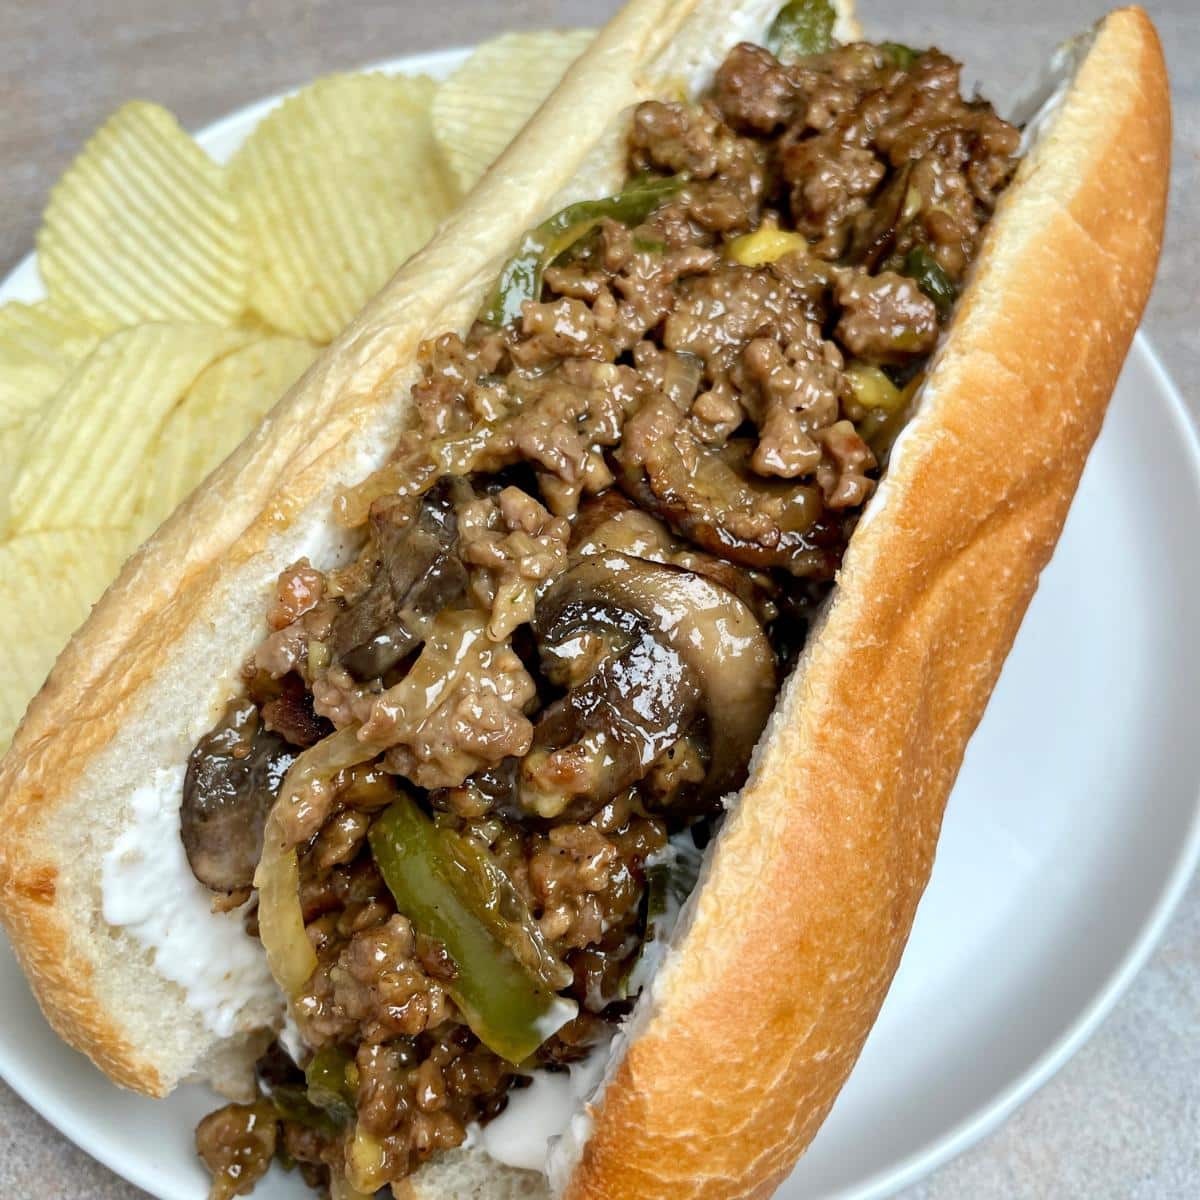 A vegan Philly cheesesteak sandwich with chips on the side.